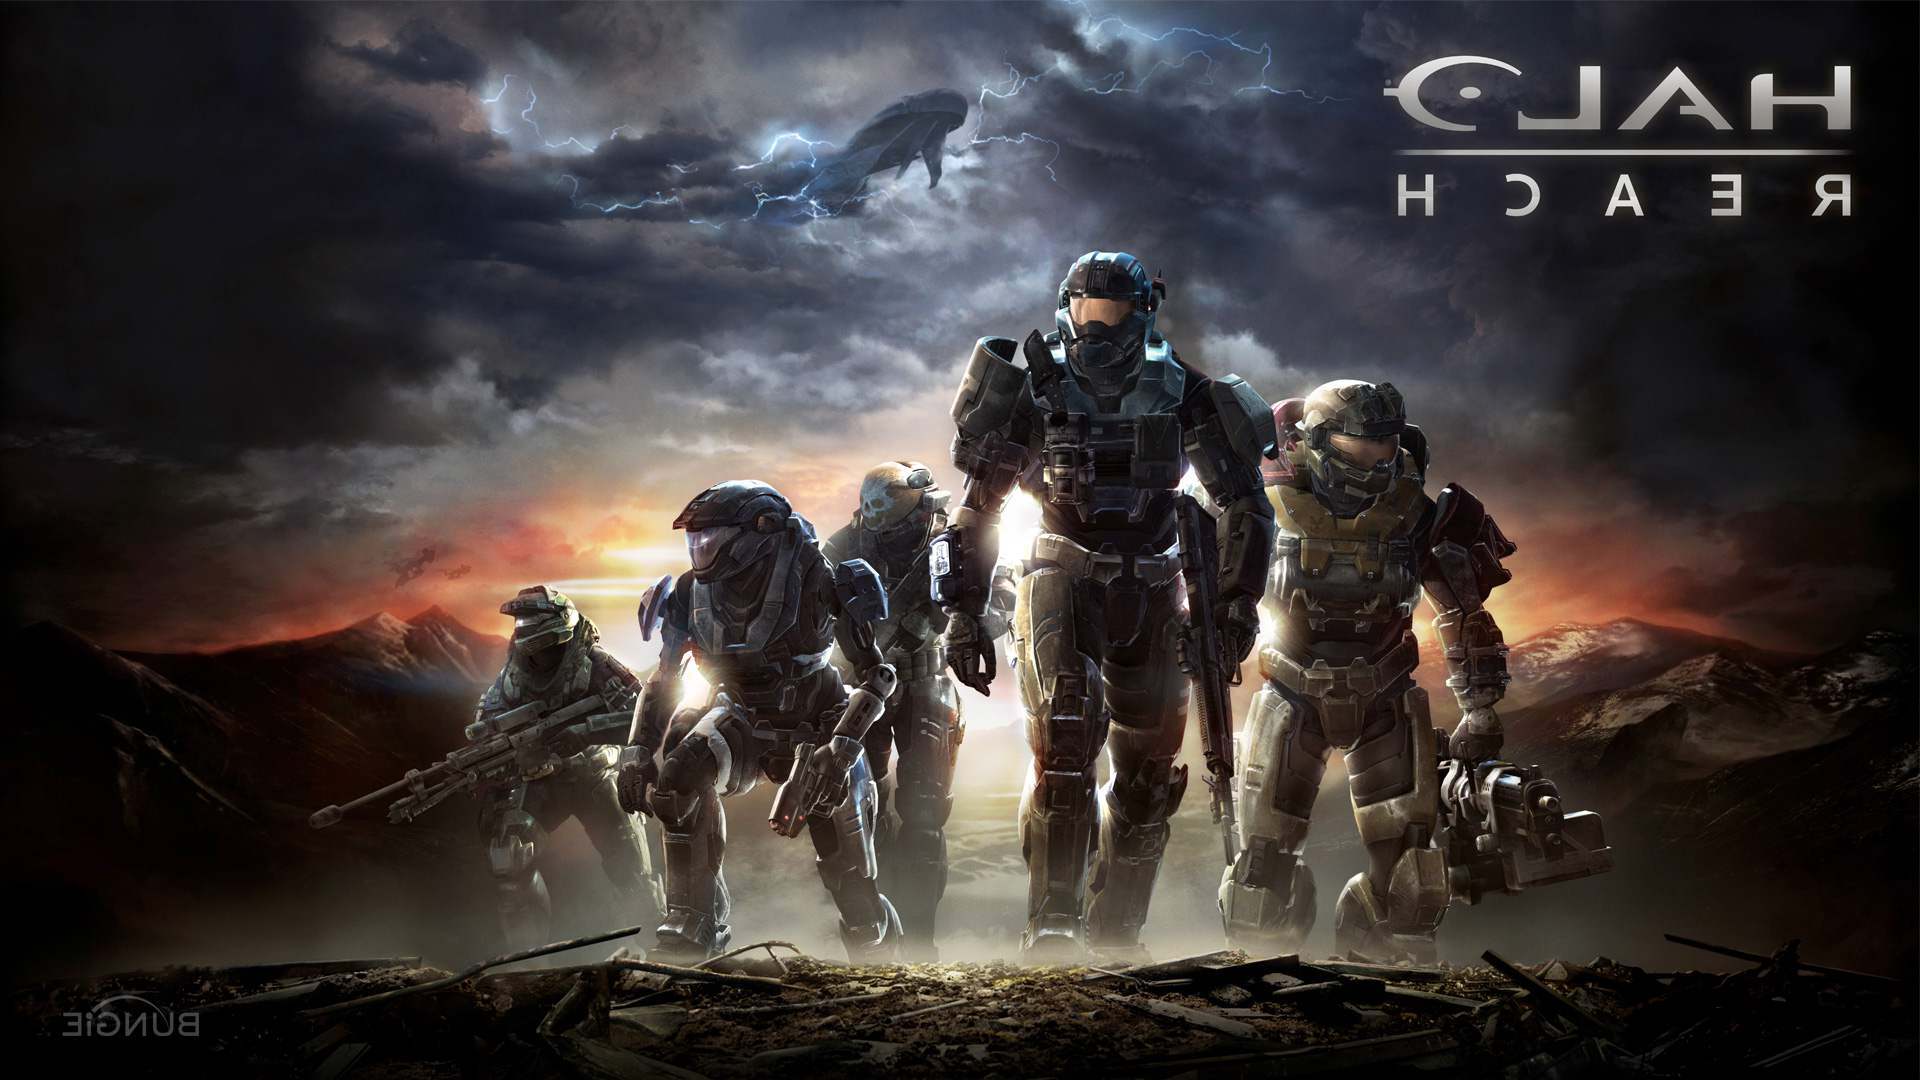 Halo Reach 4K Wallpapers